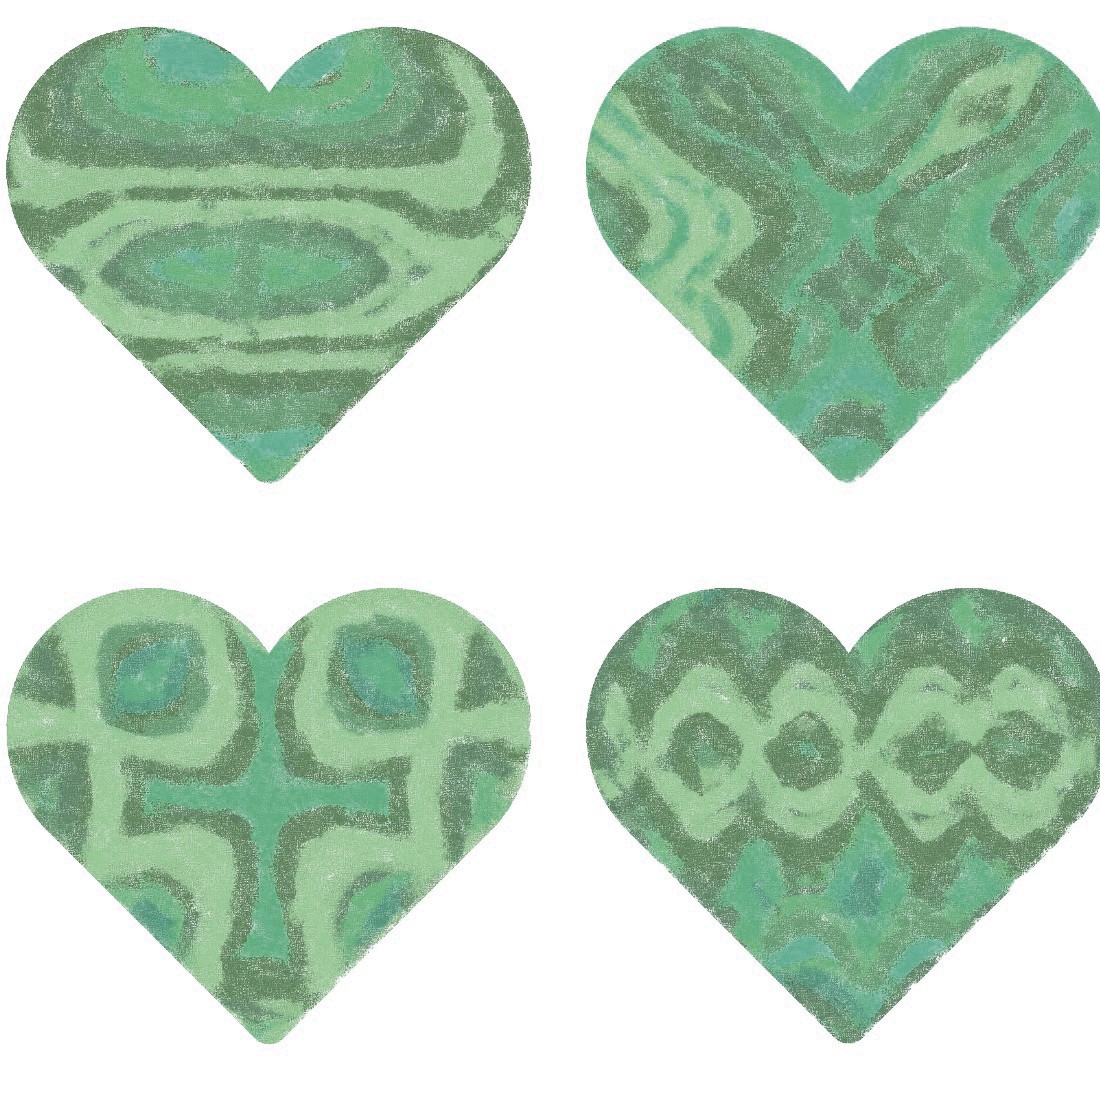 Watercolor Valentine Dusty Teal set of 8 300 nDPI preview image.